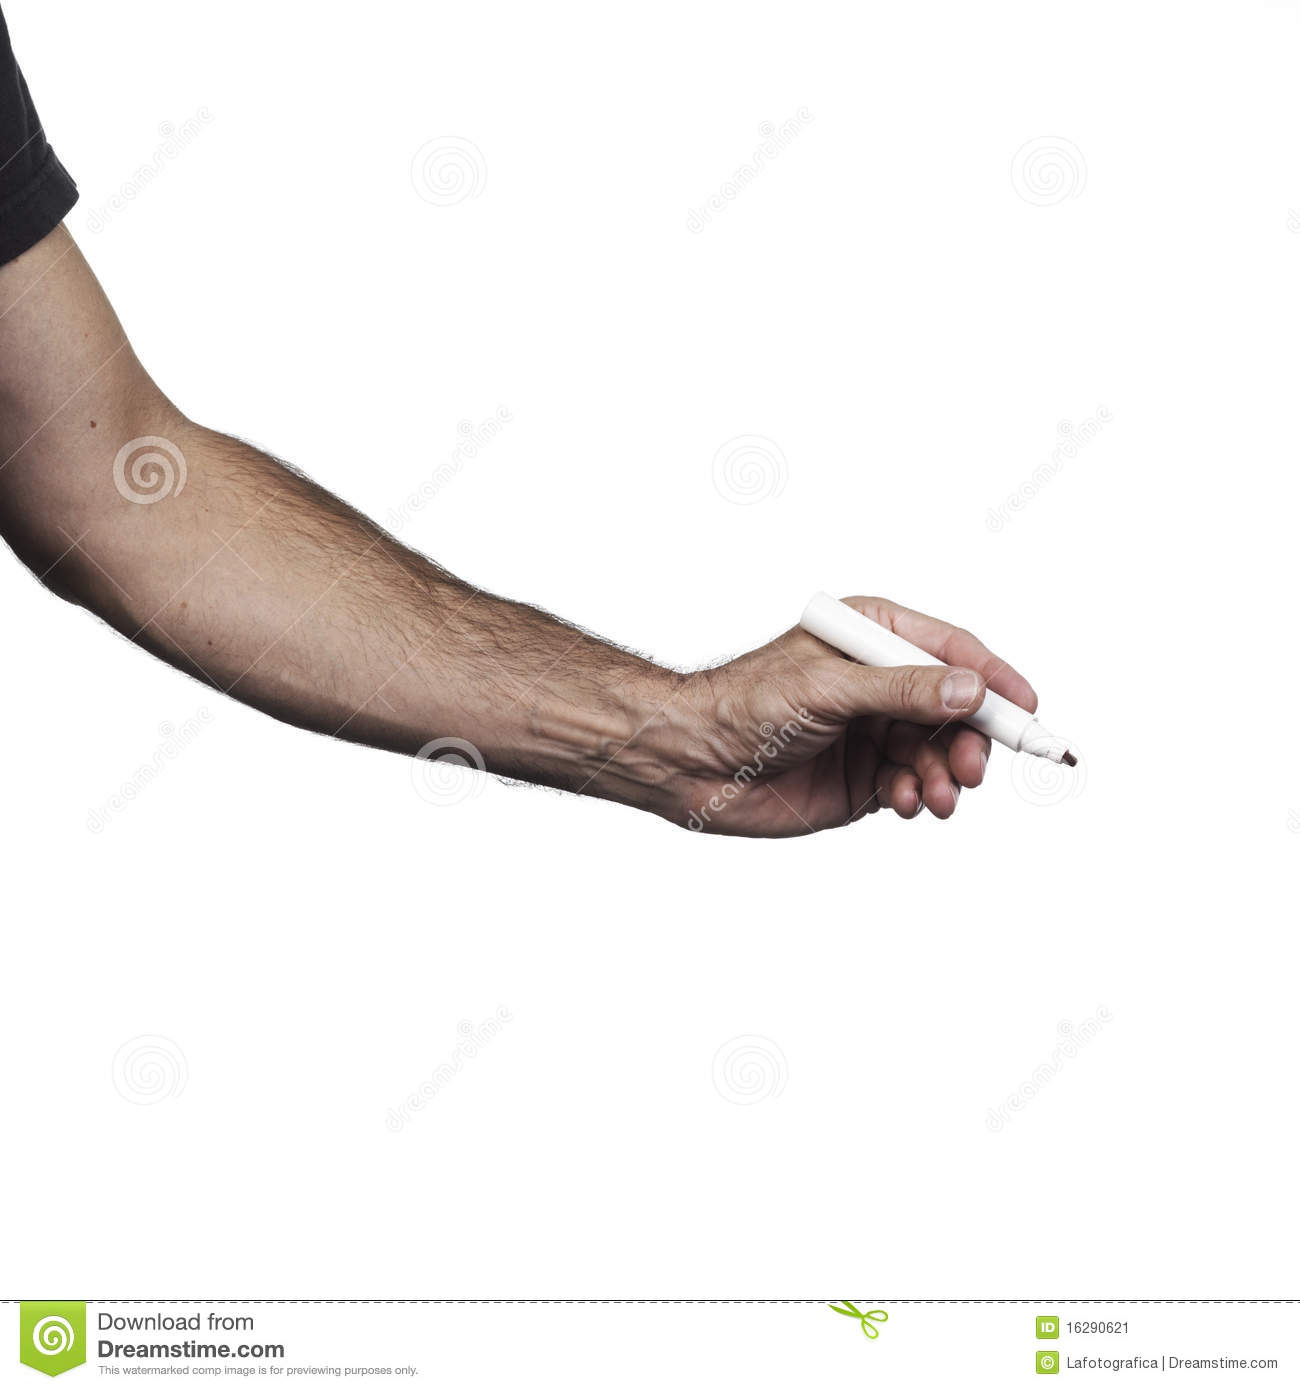 Hand Holding A Pencil Stock Image   Image  16290621